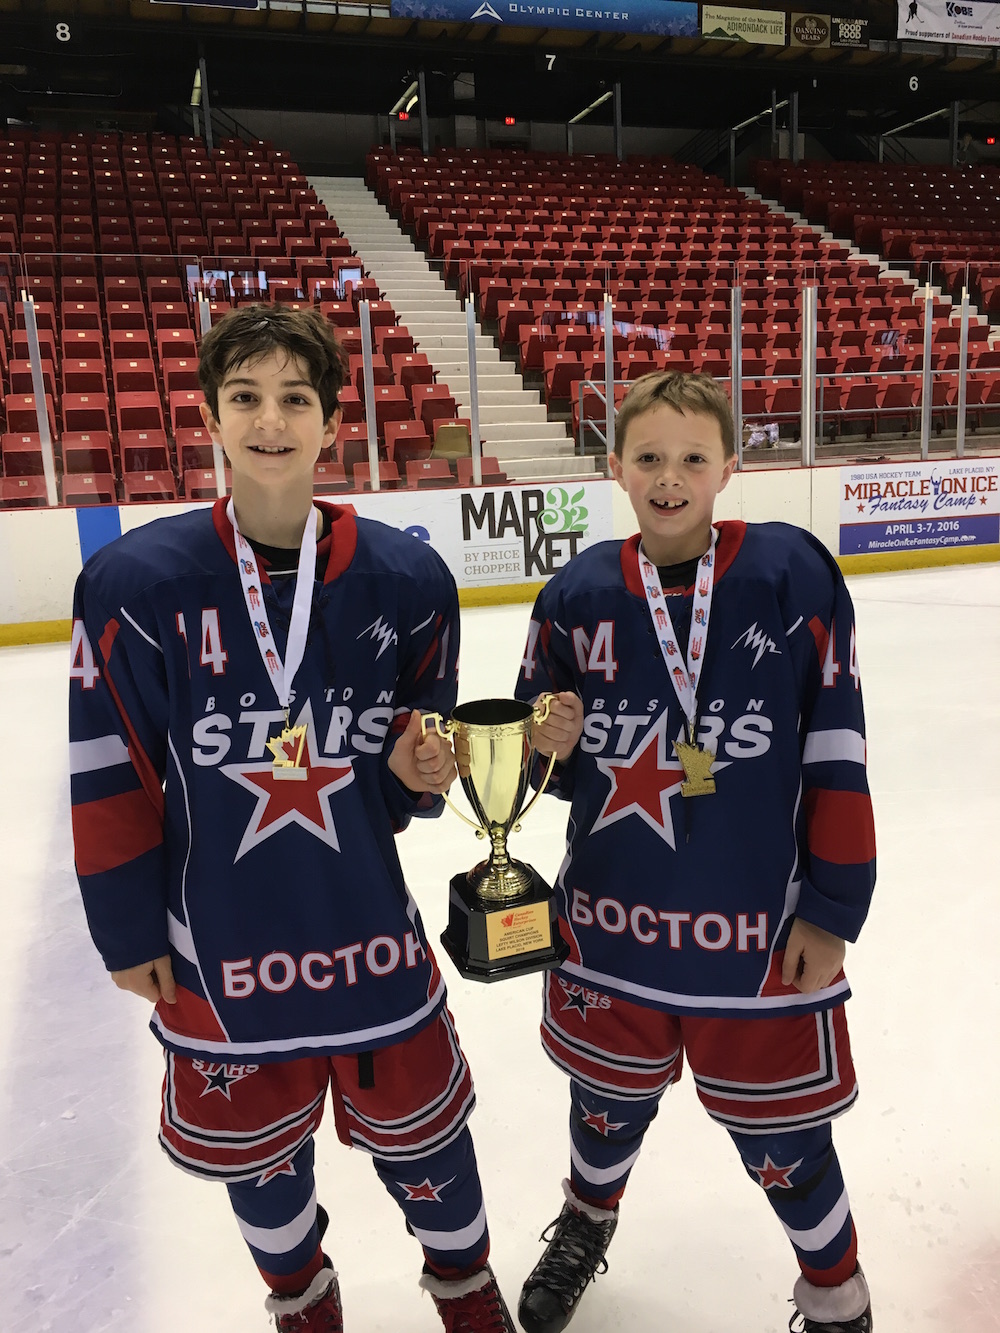 Youth hockey players Matthew Brown, left, and James O'Connor brought home gold medals from a Squirt hockey tournament in Lake Placid, N.Y.